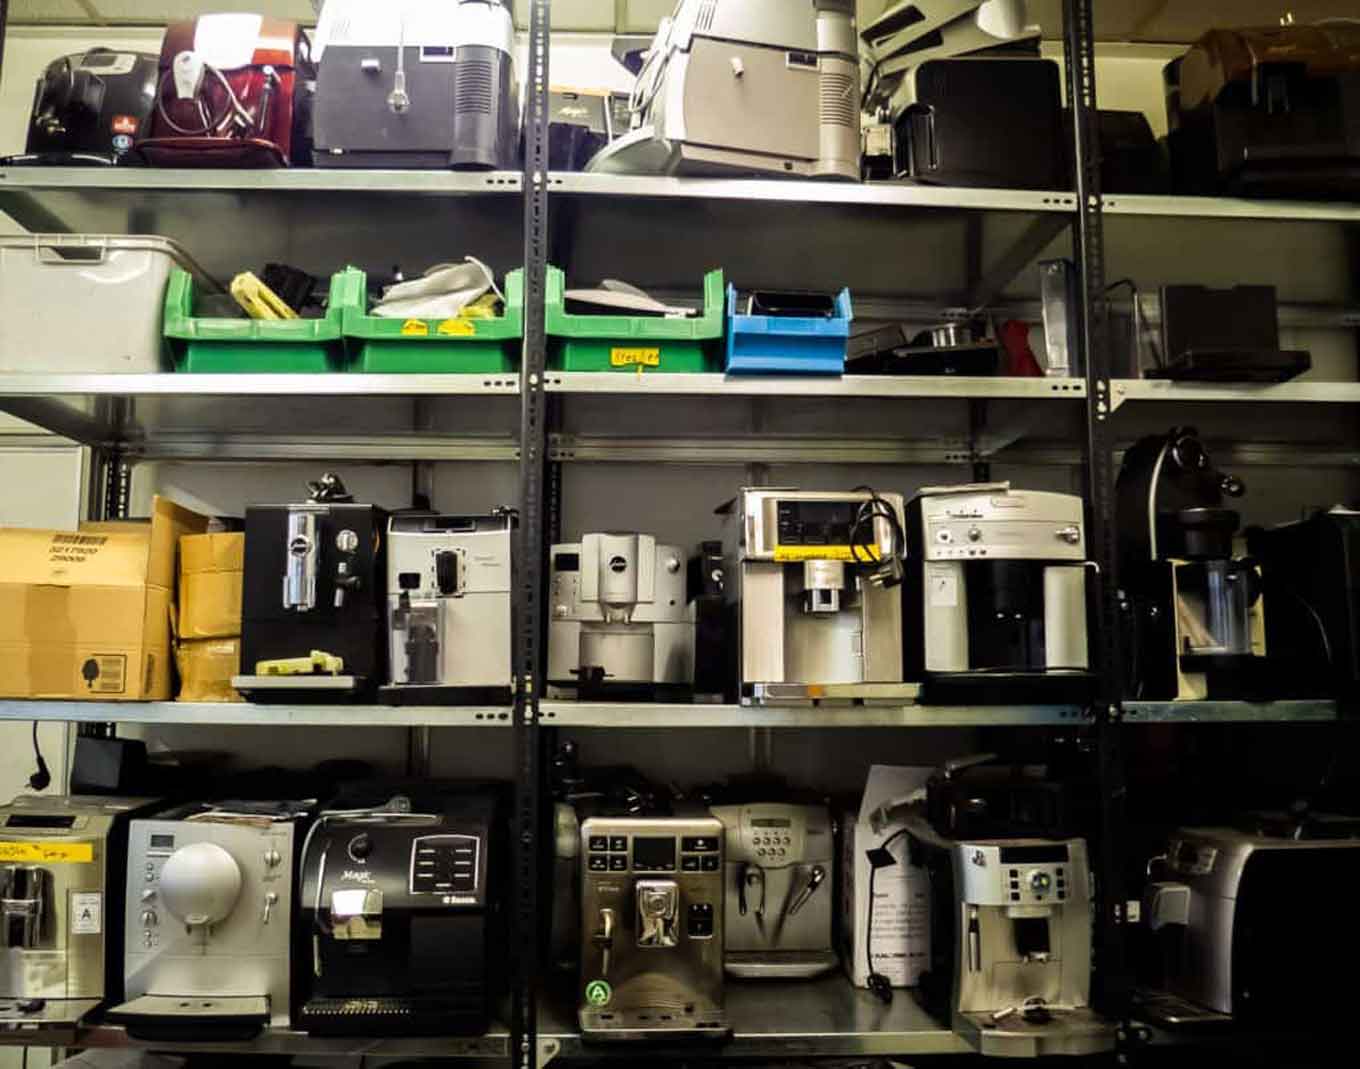 A wall of electric devices in a shelf